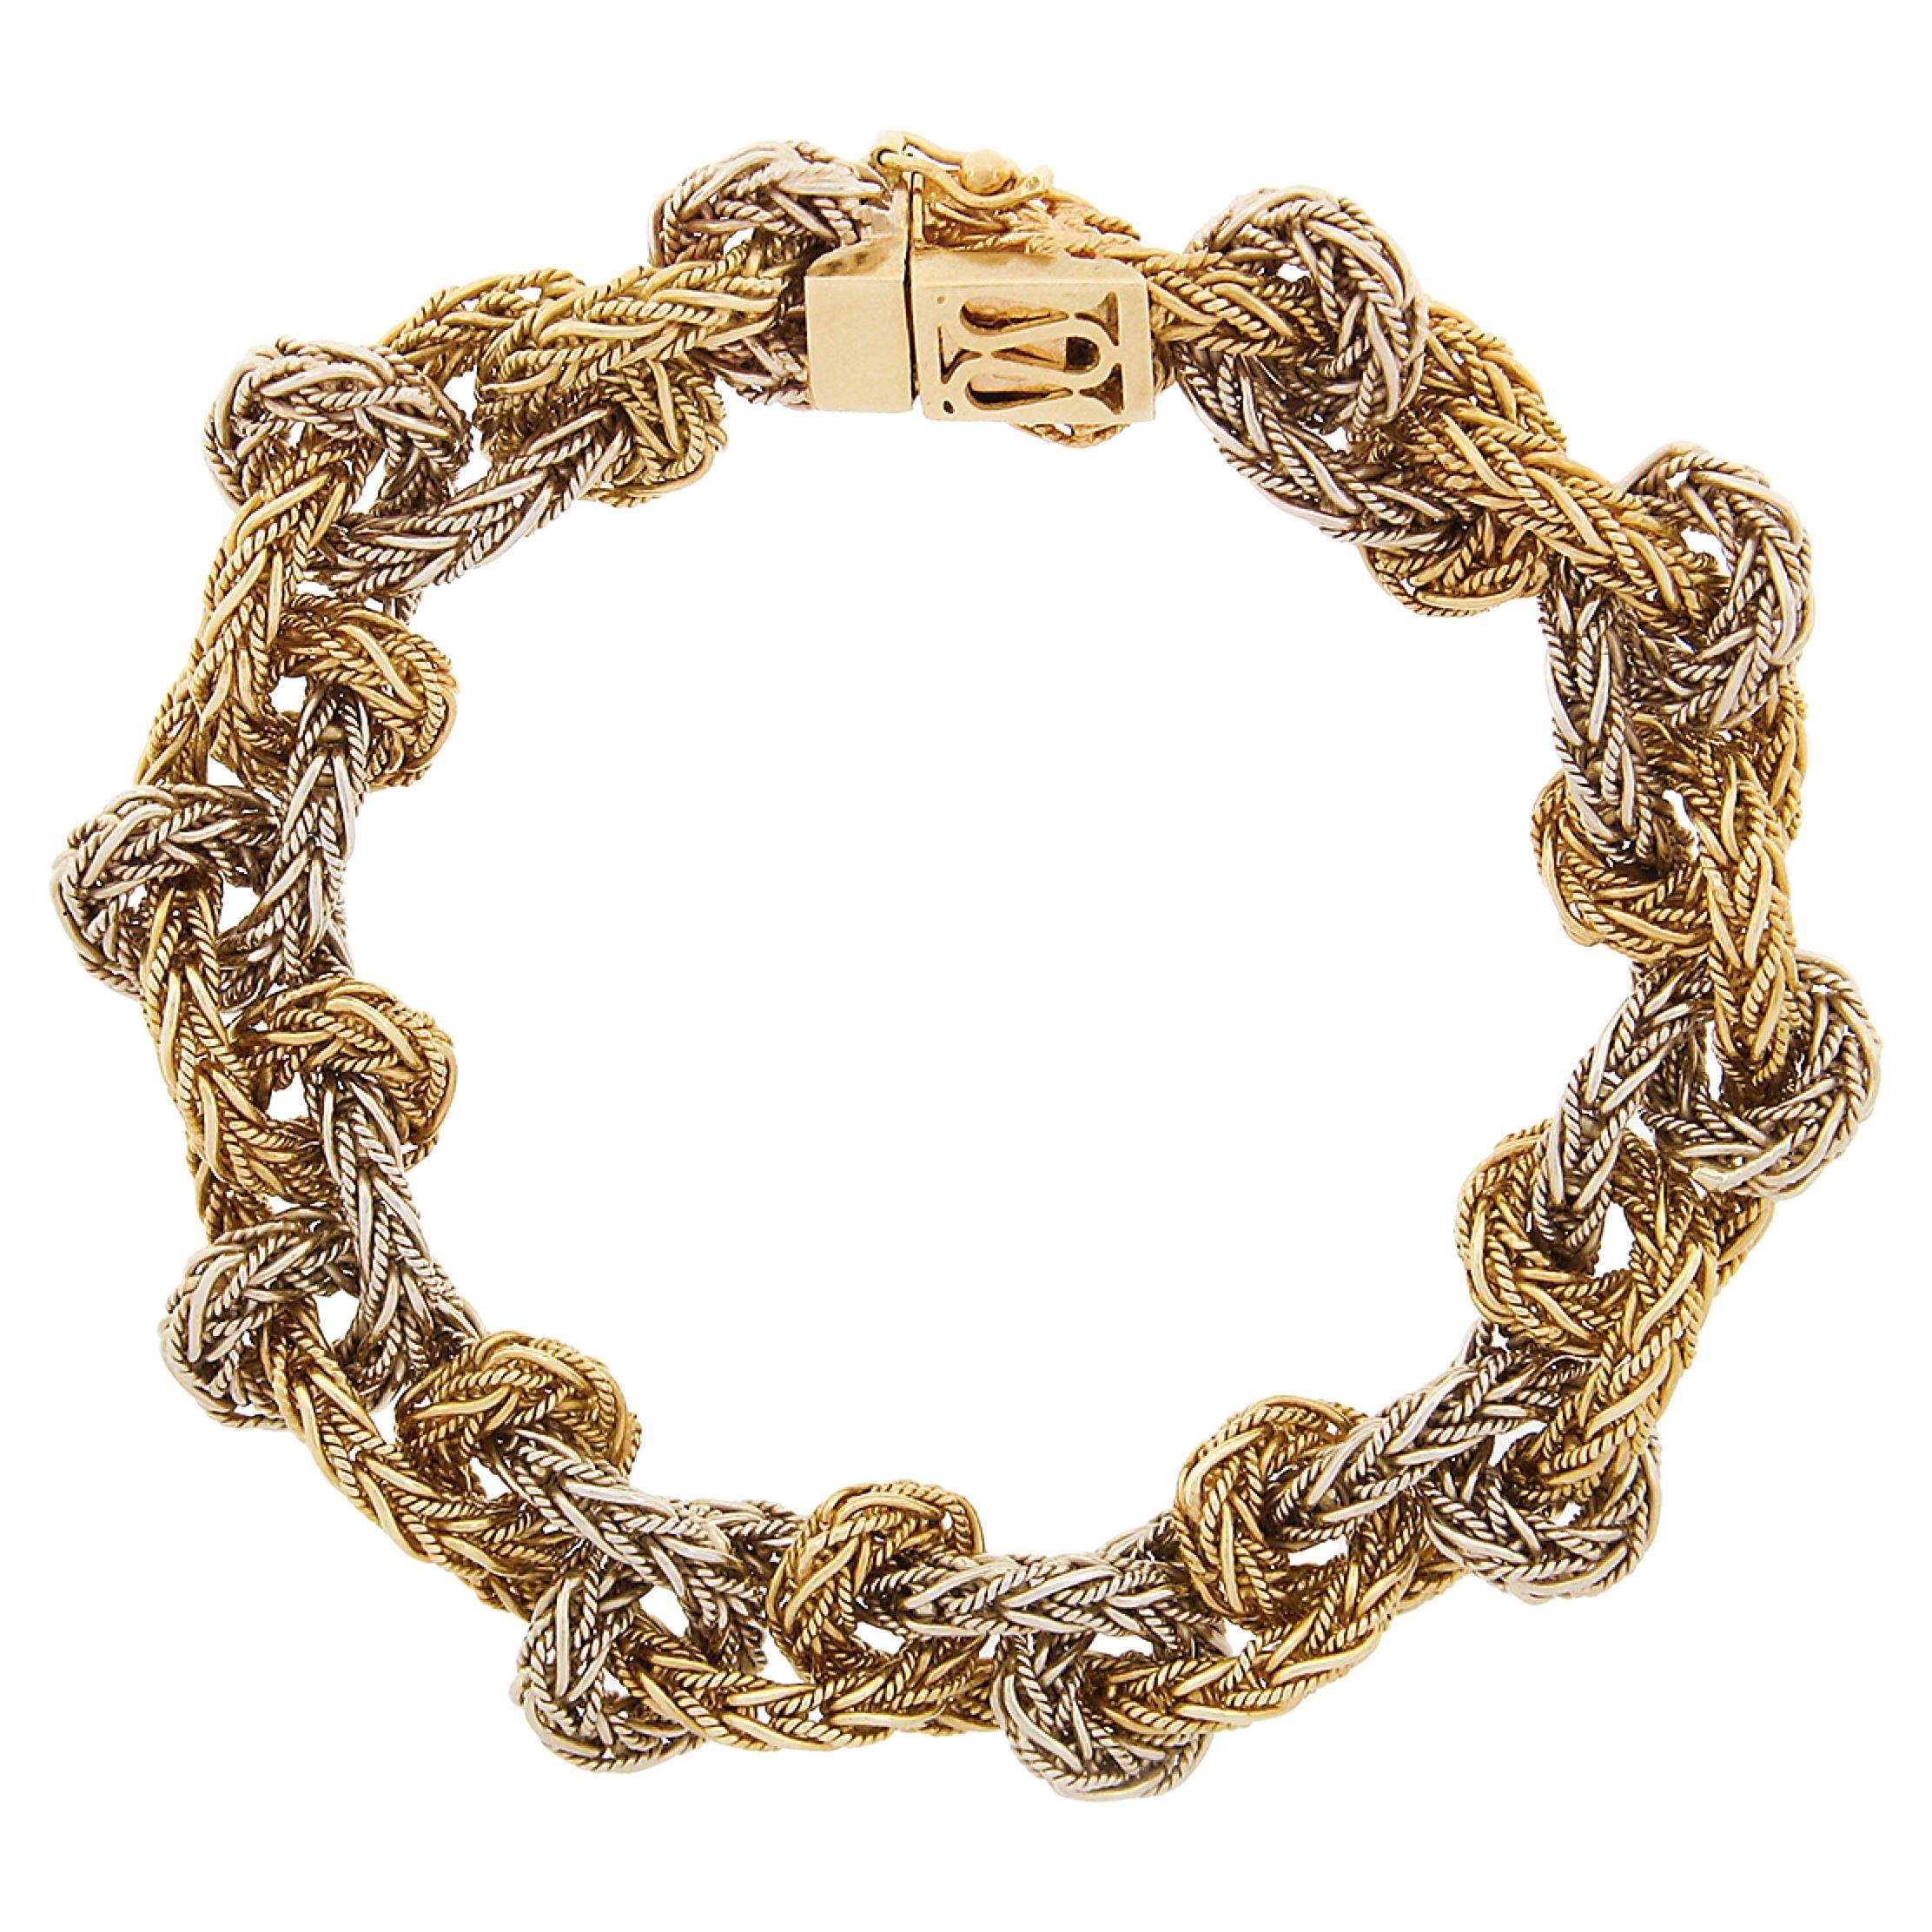 Vintage 18K TT Gold Braided Polished Twisted Wire Wheat Link Into Knot Bracelet For Sale